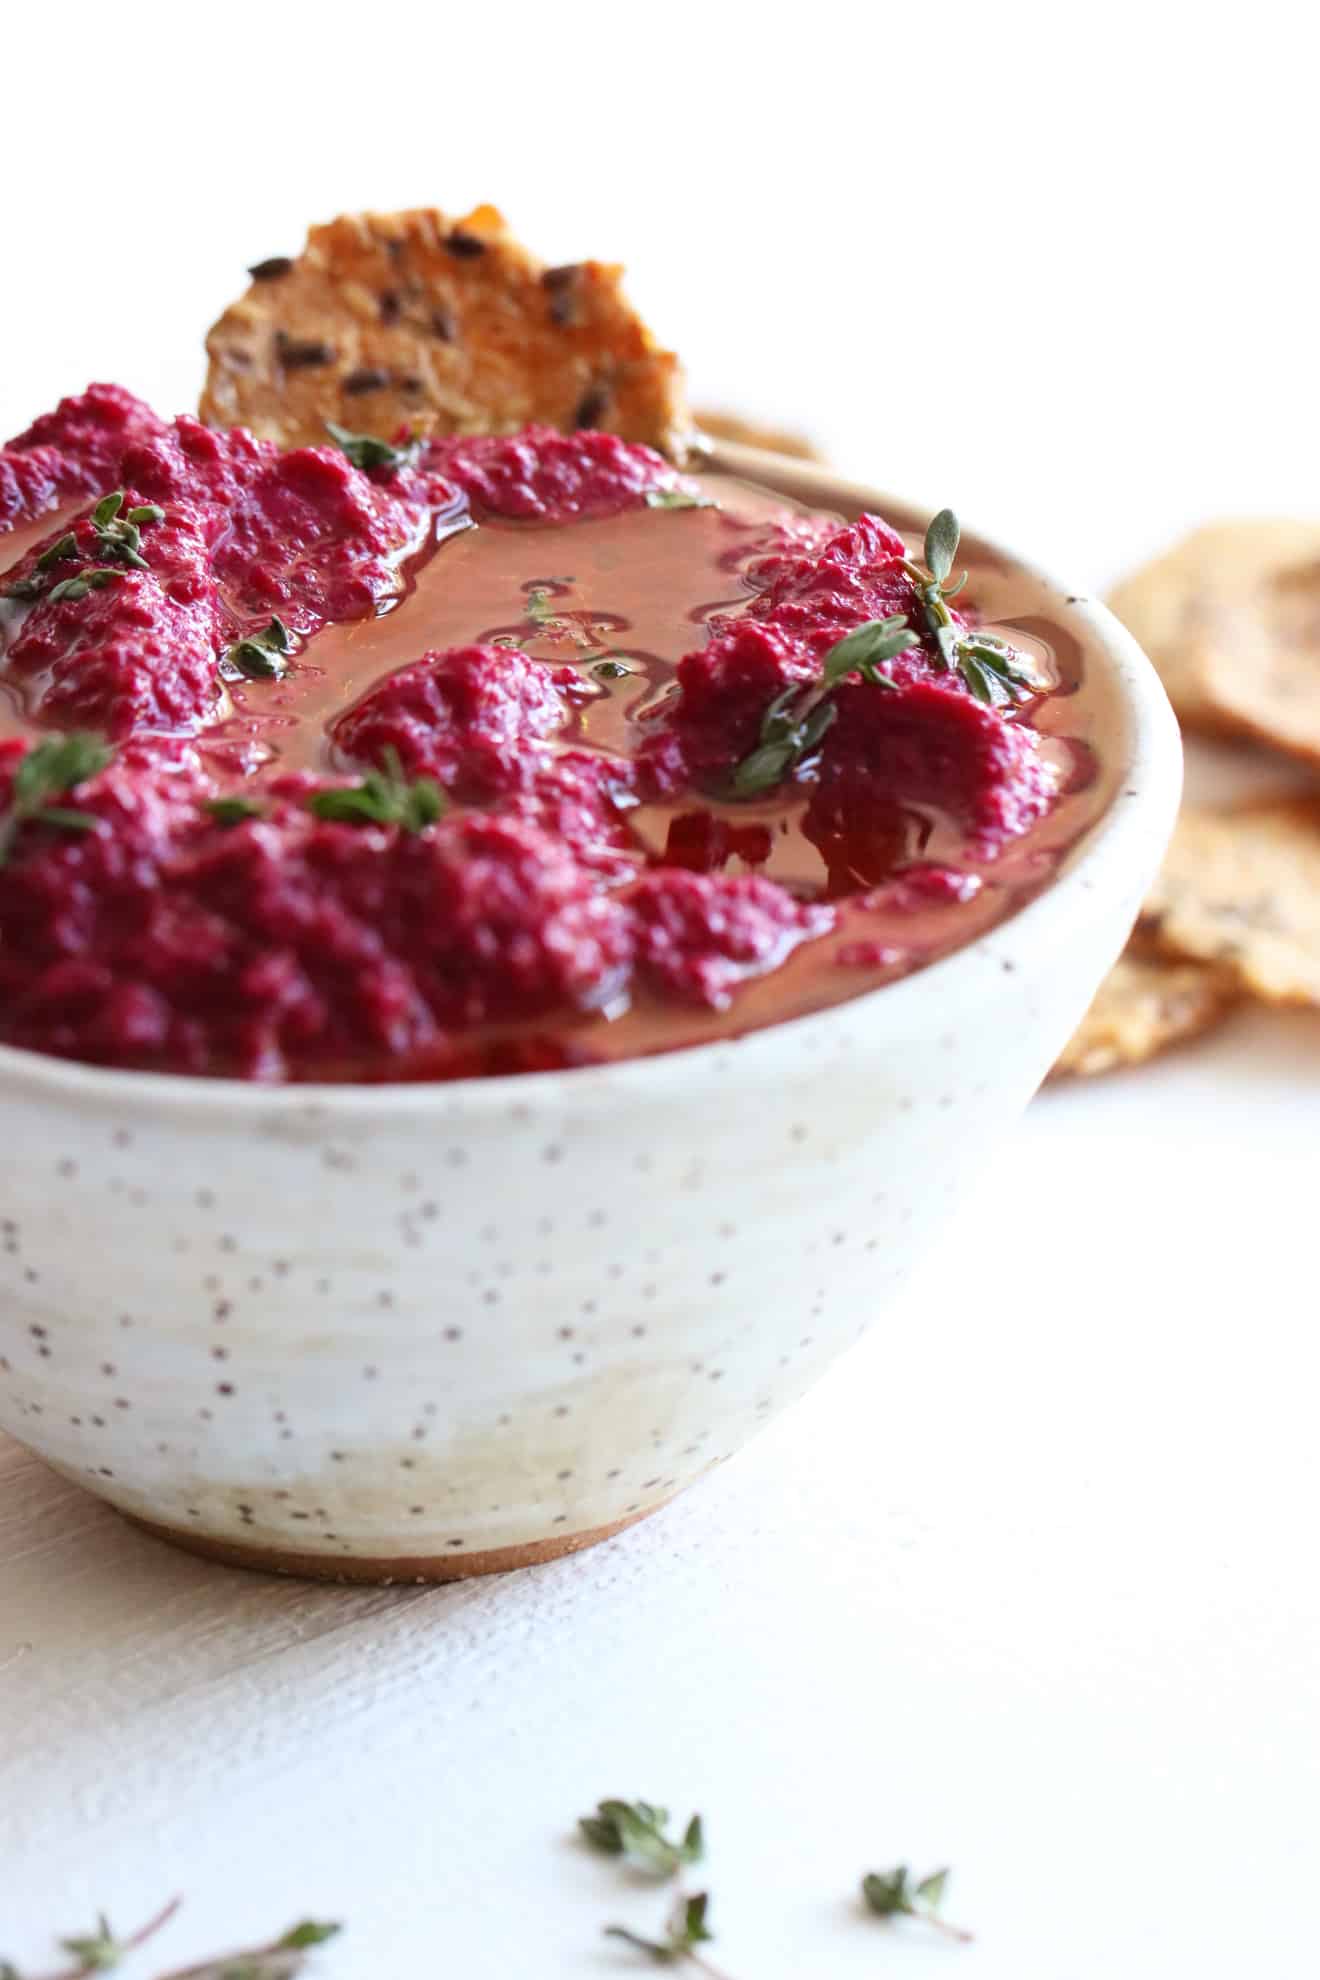 This is a side view of a speckled white bowl on a white counter. Inside the bowl is a pink beet dip topped with oil and fresh thyme leaves. Crackers are off to the side, next to the bowl on the white counter.